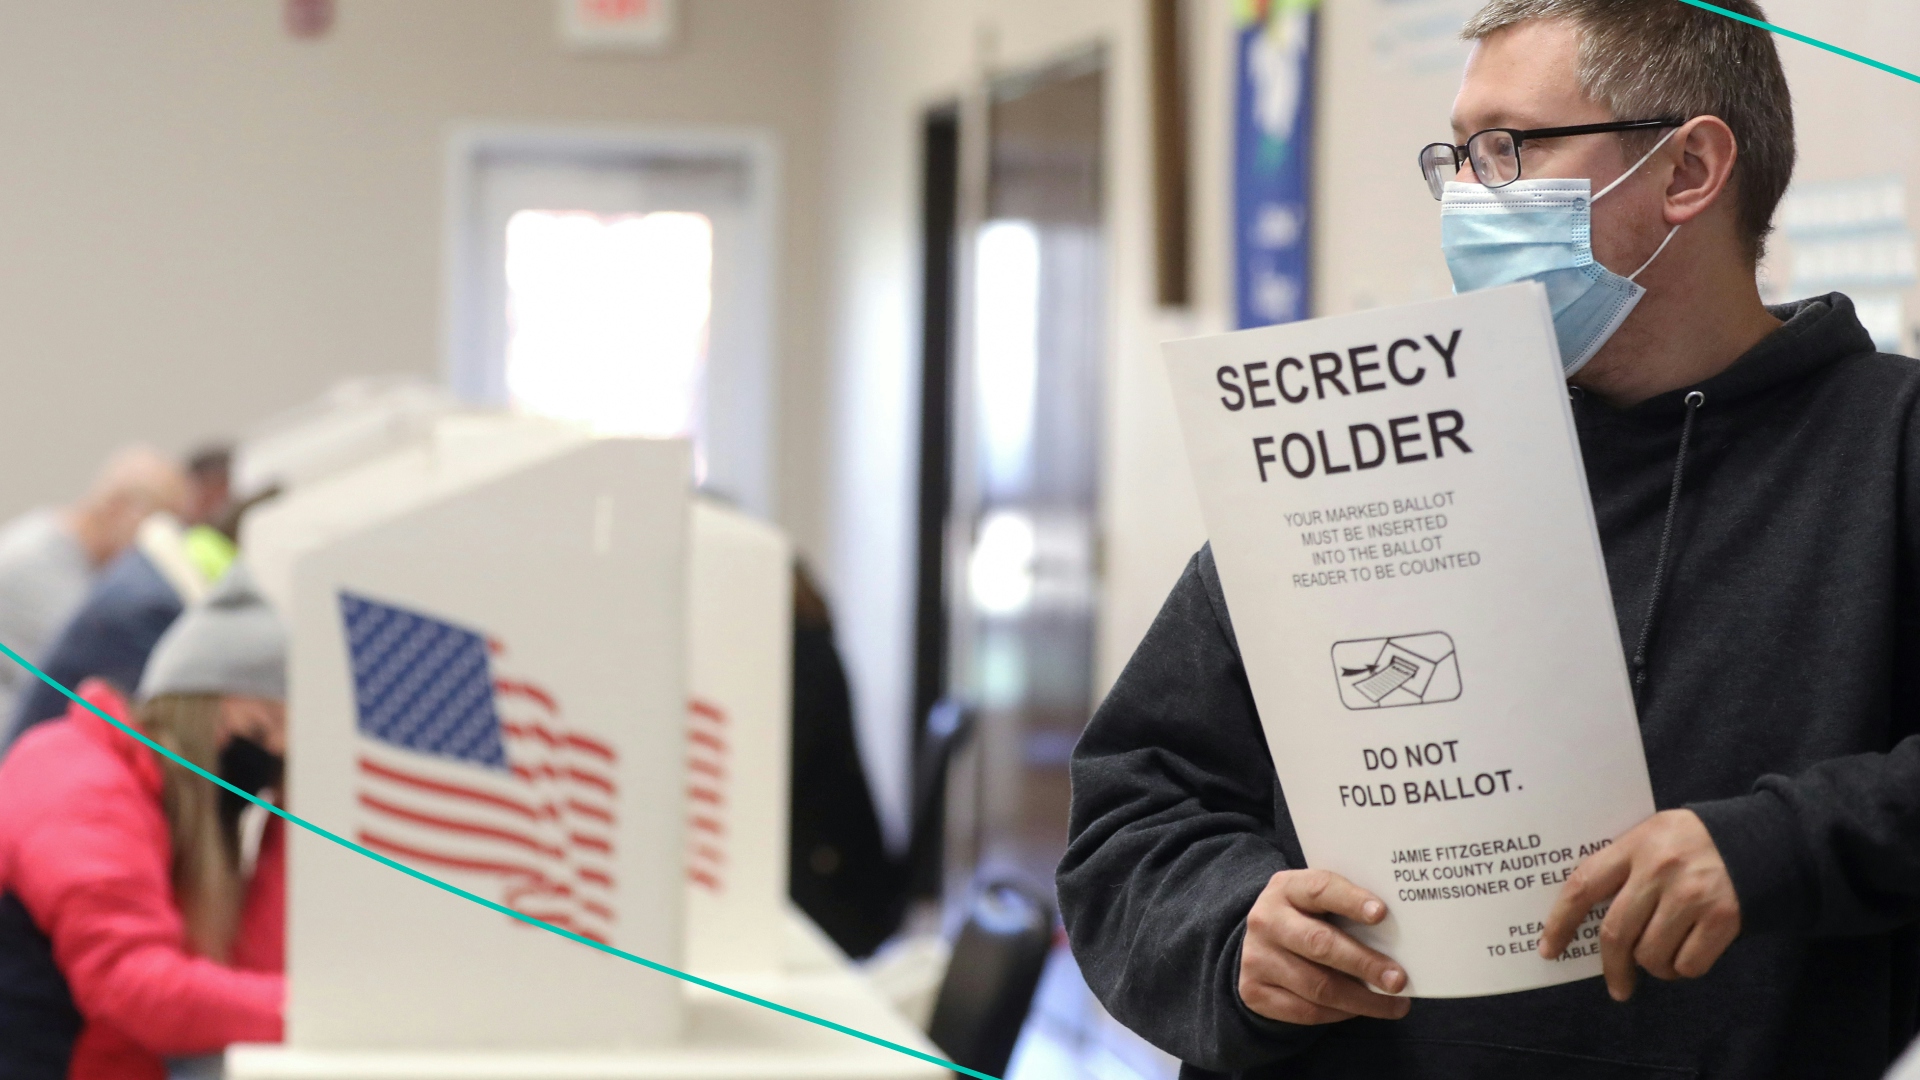 A poll worker holds a 'secrecy folder' used to conceal a voted ballot from view in a polling place at Bloomfield United Methodist Church on November 3, 2020 in Des Moines, Iowa.